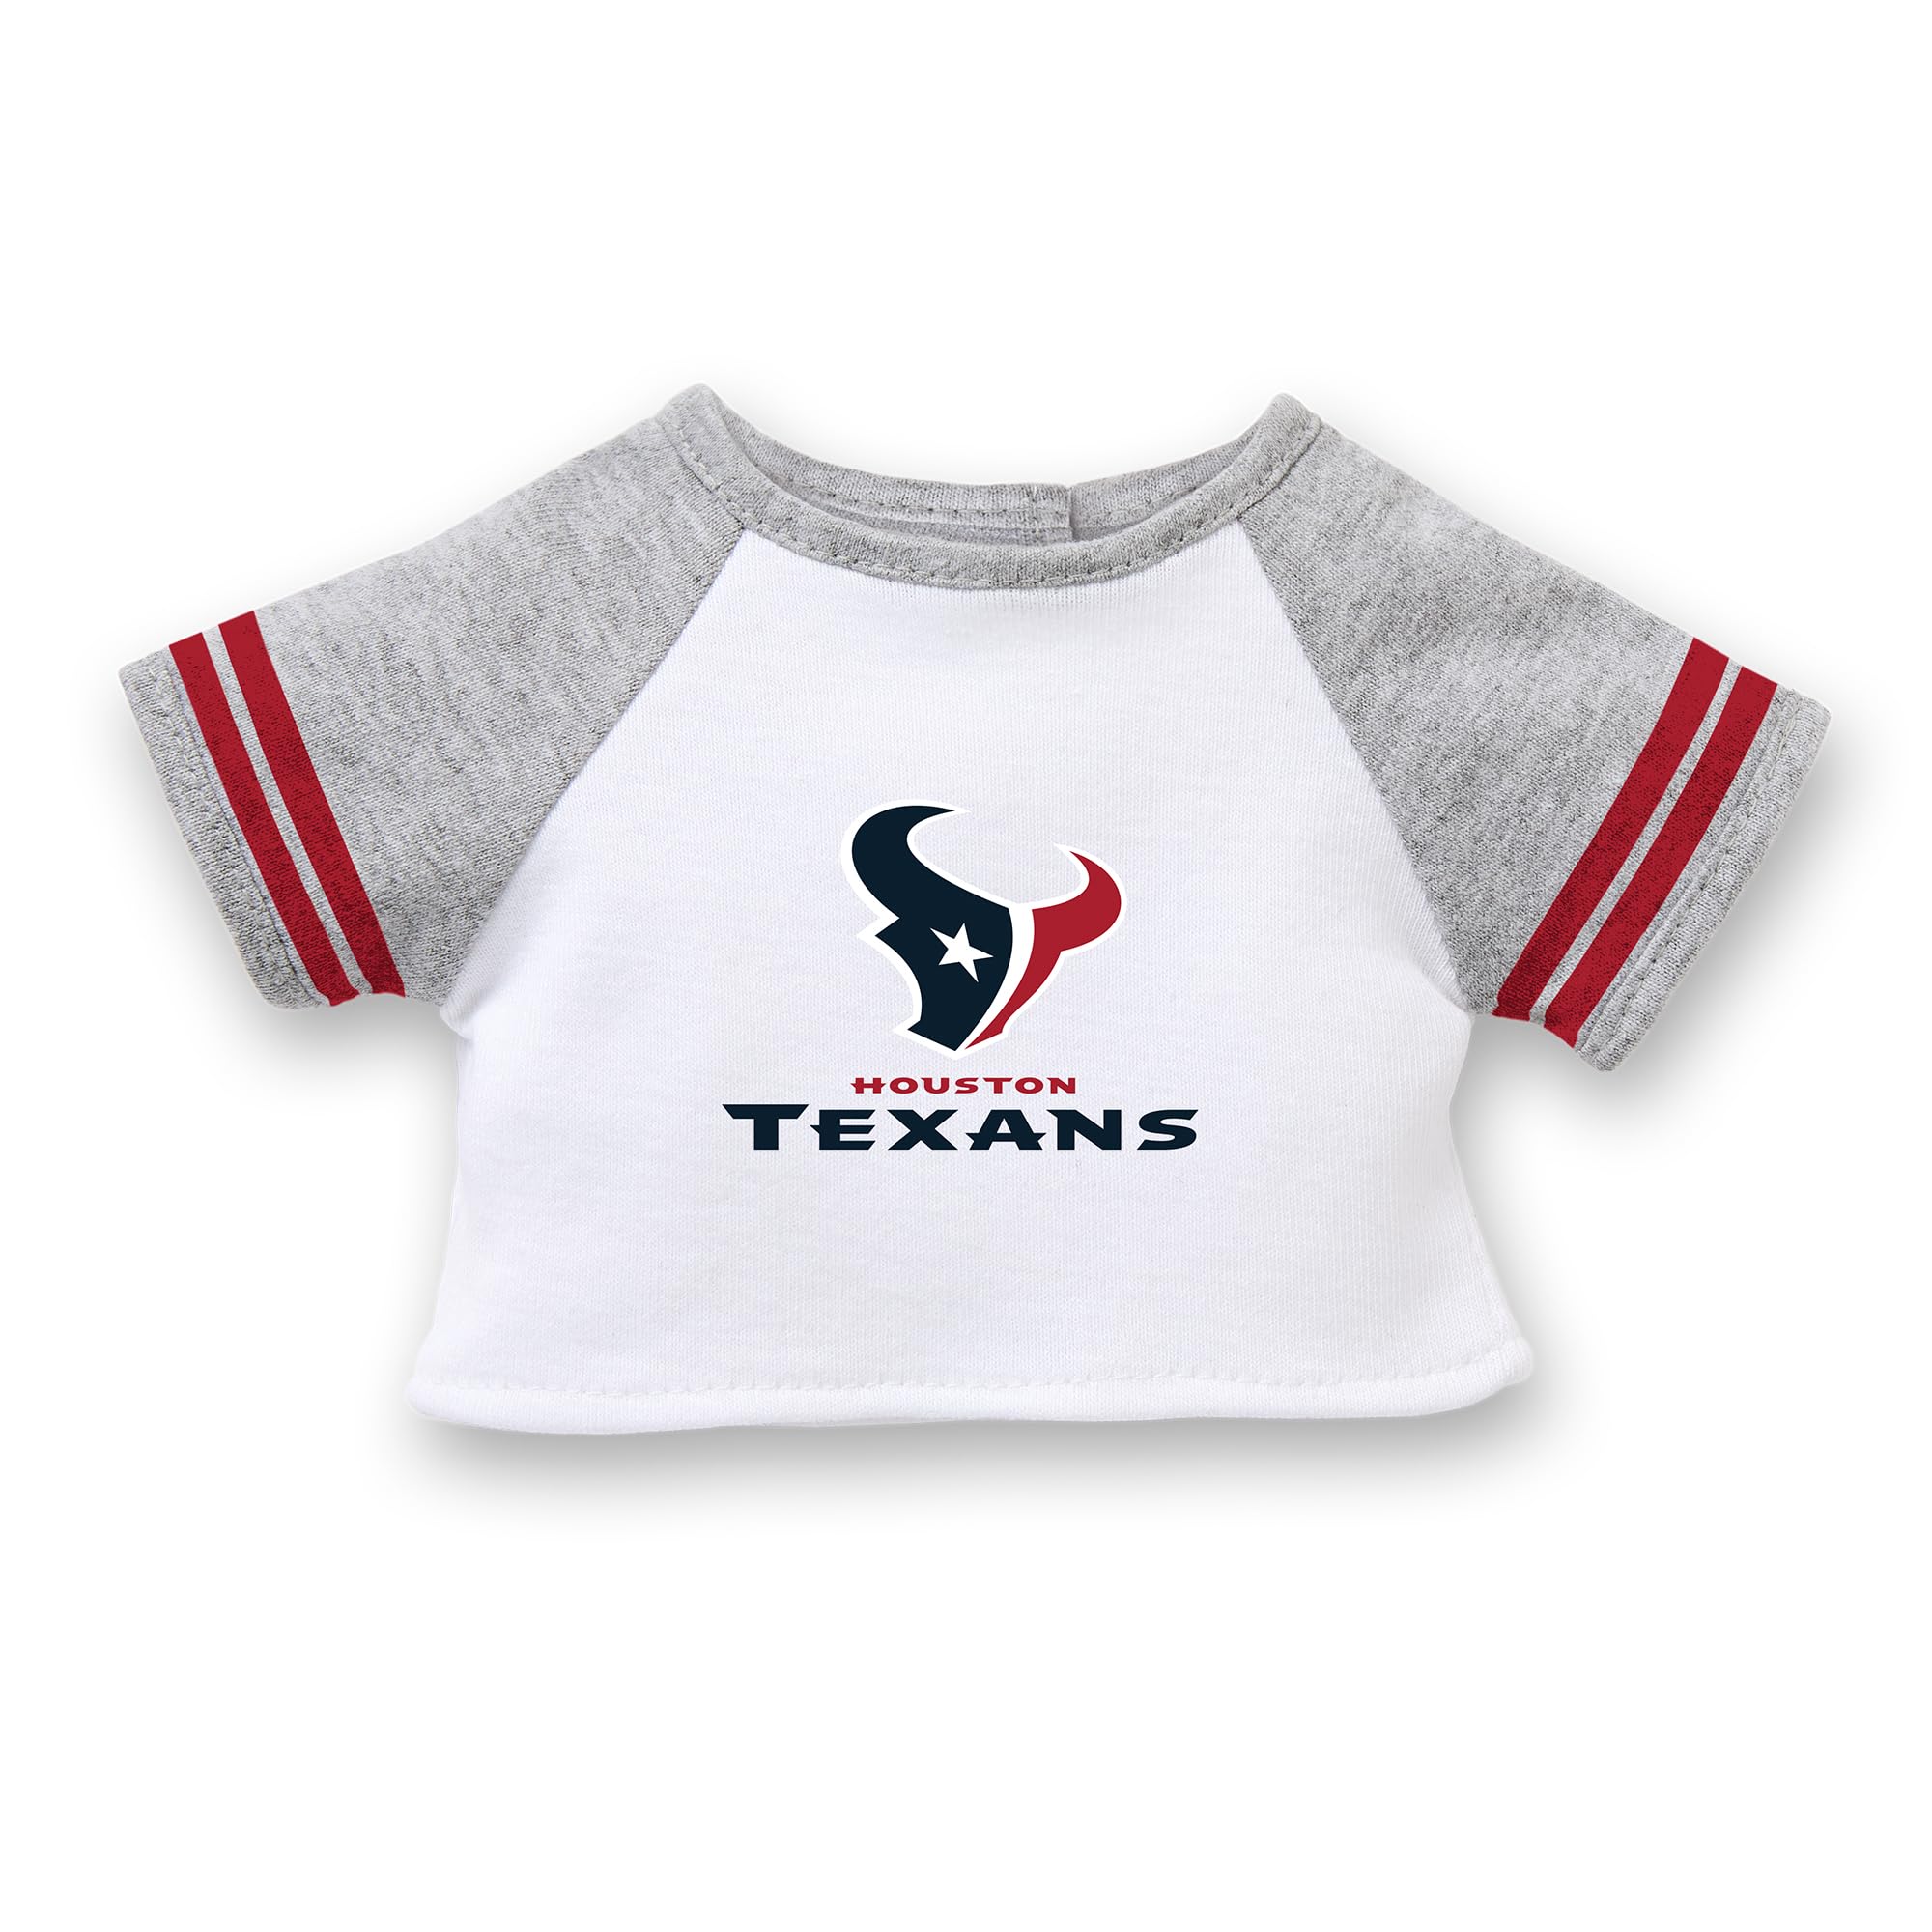 American Girl Houston Texans 18 inch Fan Tee with Crew Neck Striped Short Sleeve, Red and Navy, 1 pcs, Ages 6+